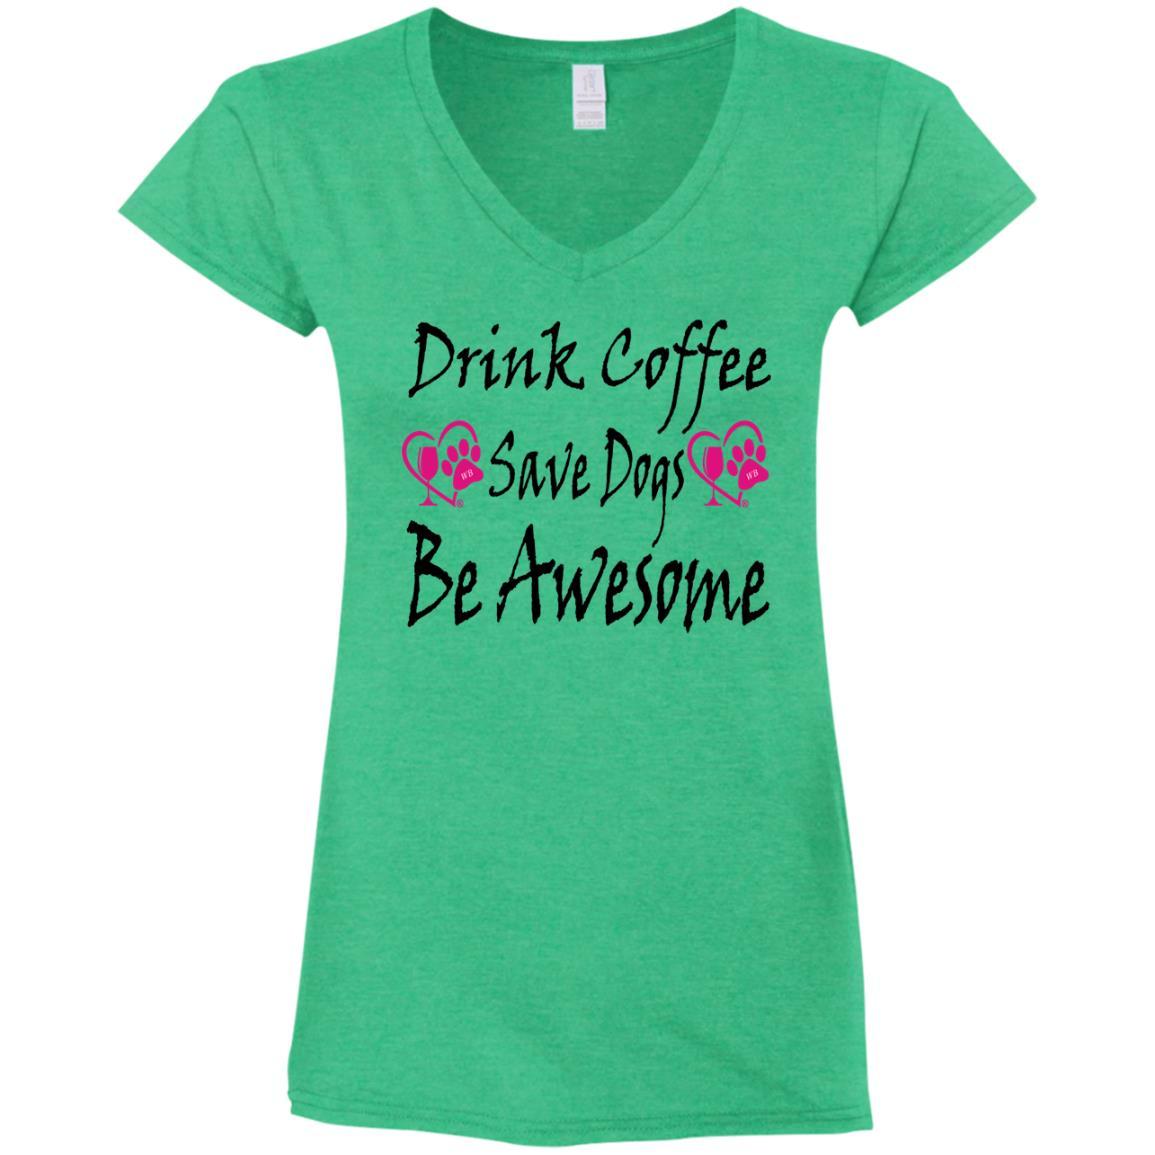 T-Shirts Heather Irish Green / S Winey Bitches Co "Drink Coffee Save Dogs Be Awesome" Ladies' Fitted Softstyle 4.5 oz V-Neck T-Shirt WineyBitchesCo